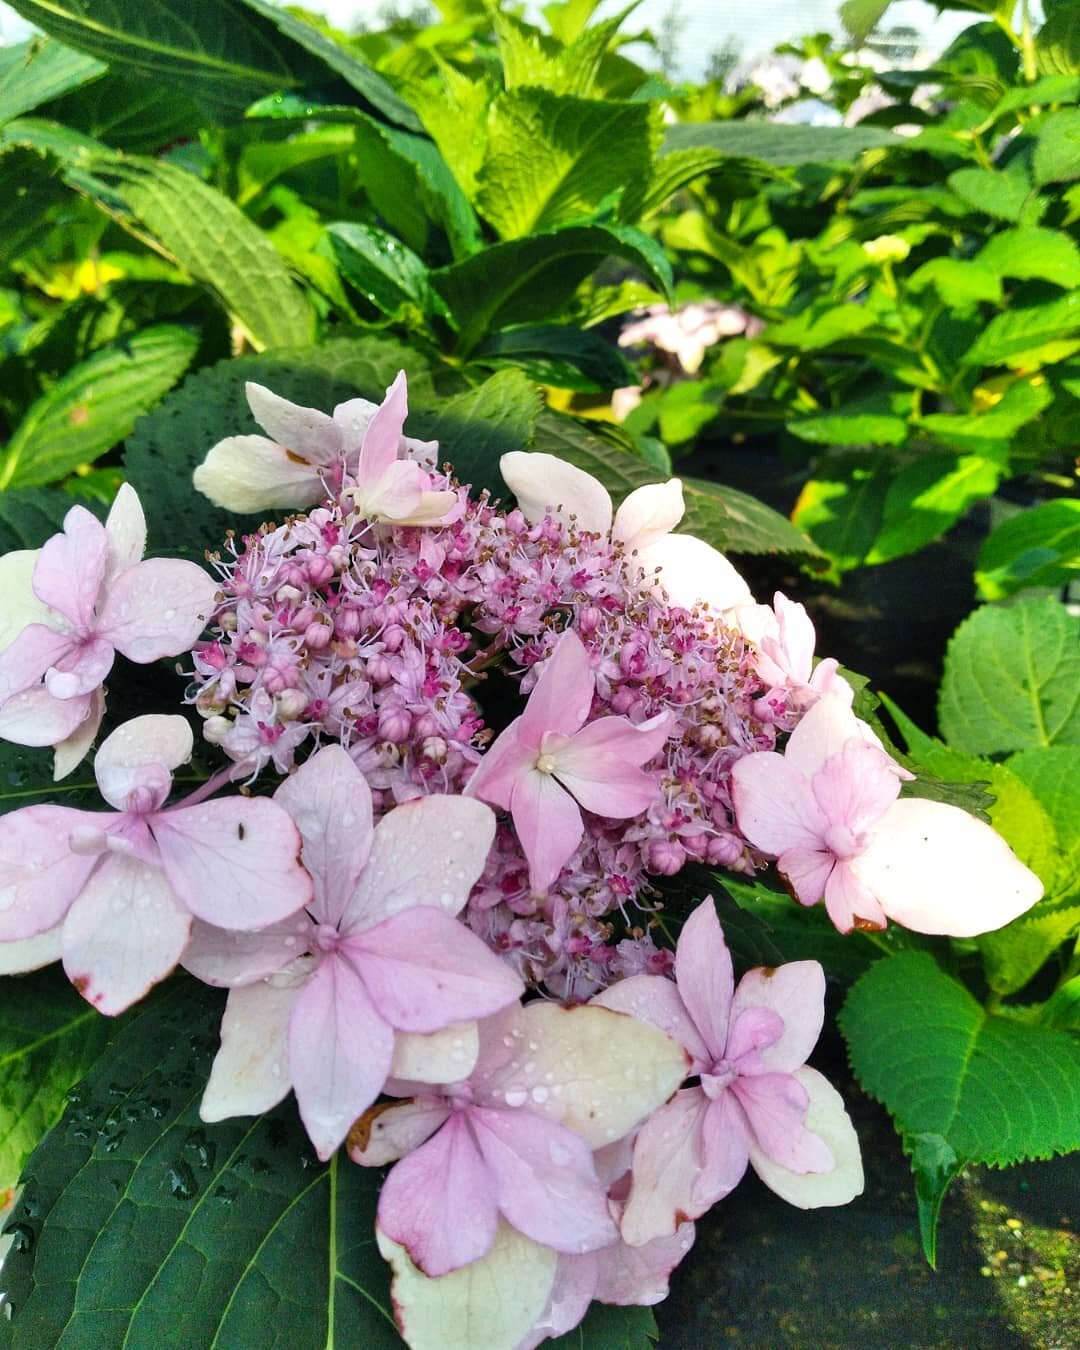 'Tuff Stuff' Mountain Hydrangea 

🌱Prefers morning sun and afternoon shade 
🌱Pink or purple lacecap blooms depending on soil 
🌱 2-3' height and width 
🌱Zone 5 
🌱Adds that little touch of elegance to the garden! 

#hydrangeaseason #mountainhydran